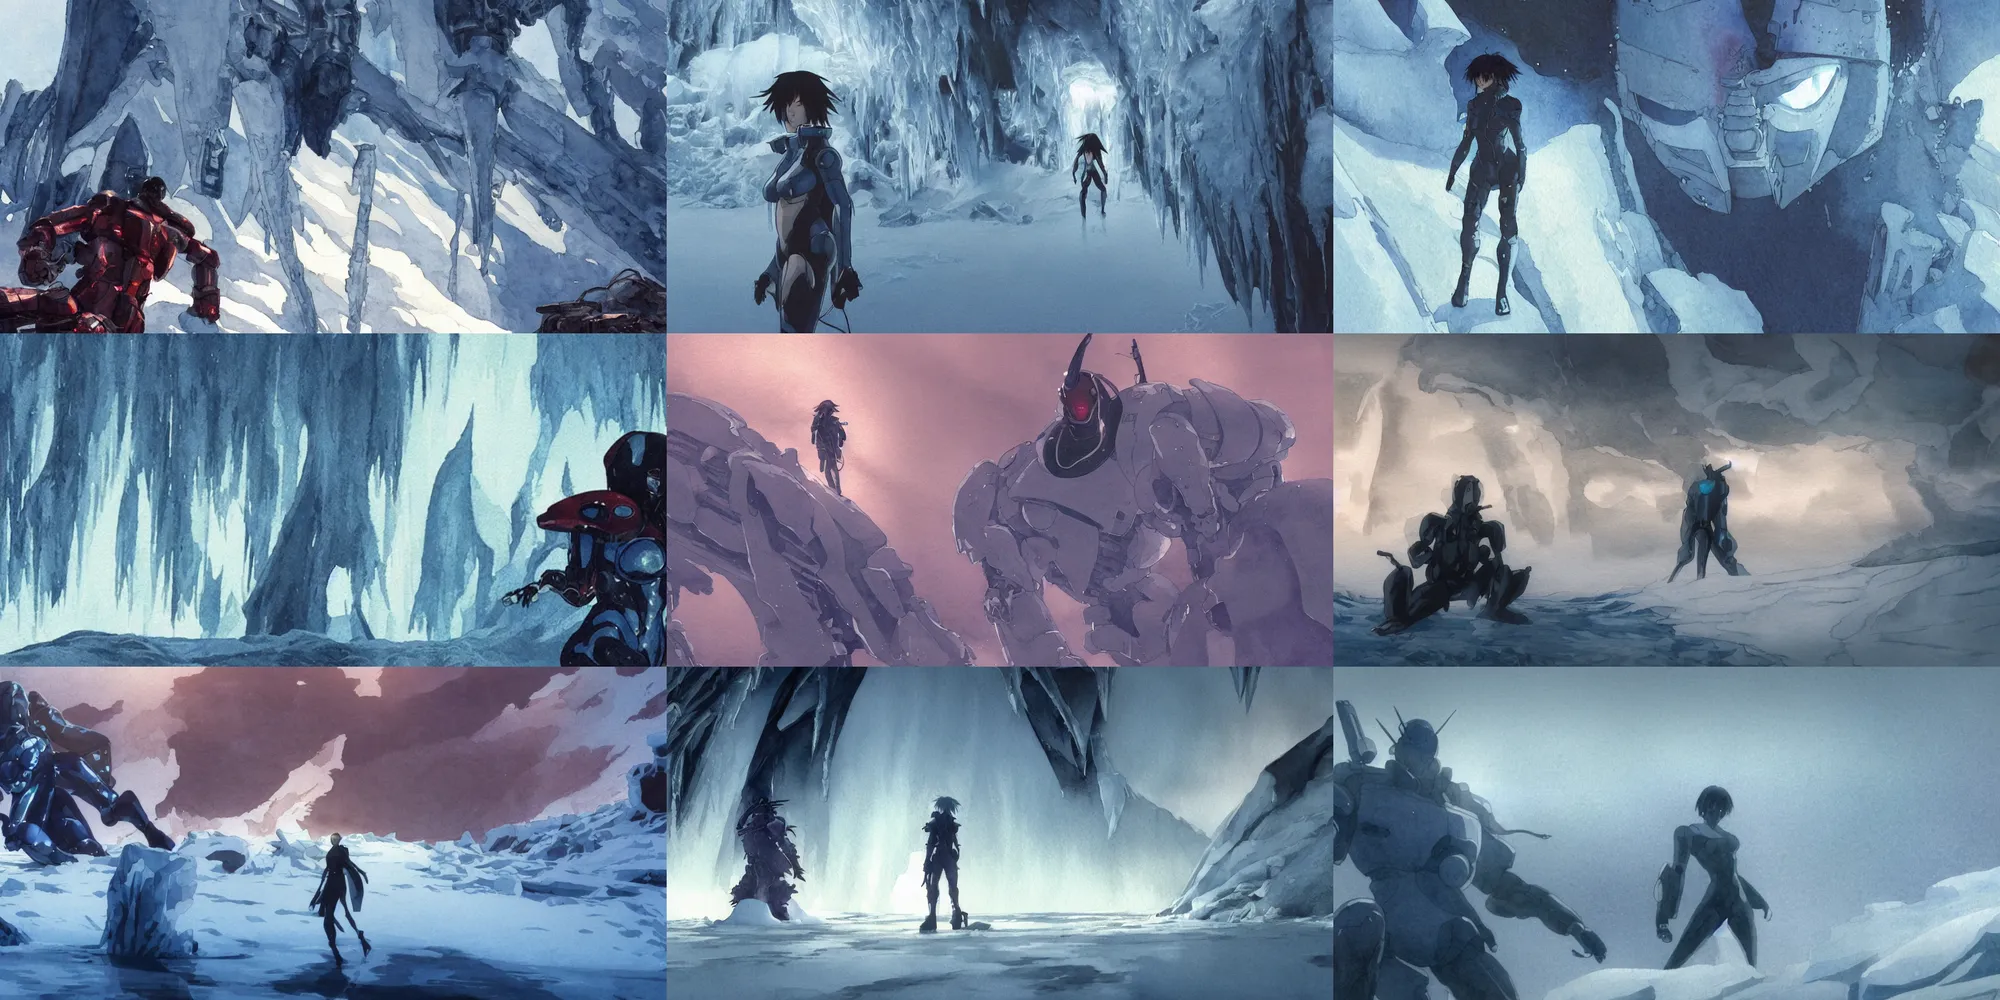 Prompt: incredible wide screenshot, simple watercolor, masamune shirow ghost in the shell movie scene Kusanagi, Giant robot head inside the ice, giant robot bones, spine and ribs in glacier in Antarctica, golden hour, rocky cliff, subtle glow under the ice, frozen waterfall, frost, snow, wearing a parker, windy, dust, most memorable scene, red, blue, orange, blue short hair, odd pipes, greebles, ice, metallic reflections, refraction, bounce light, phil hale, Yoji Shinkawa, bright rim light, hd, 4k, remaster, dynamic camera angle, deep 3 point perspective, fish eye, dynamic scene